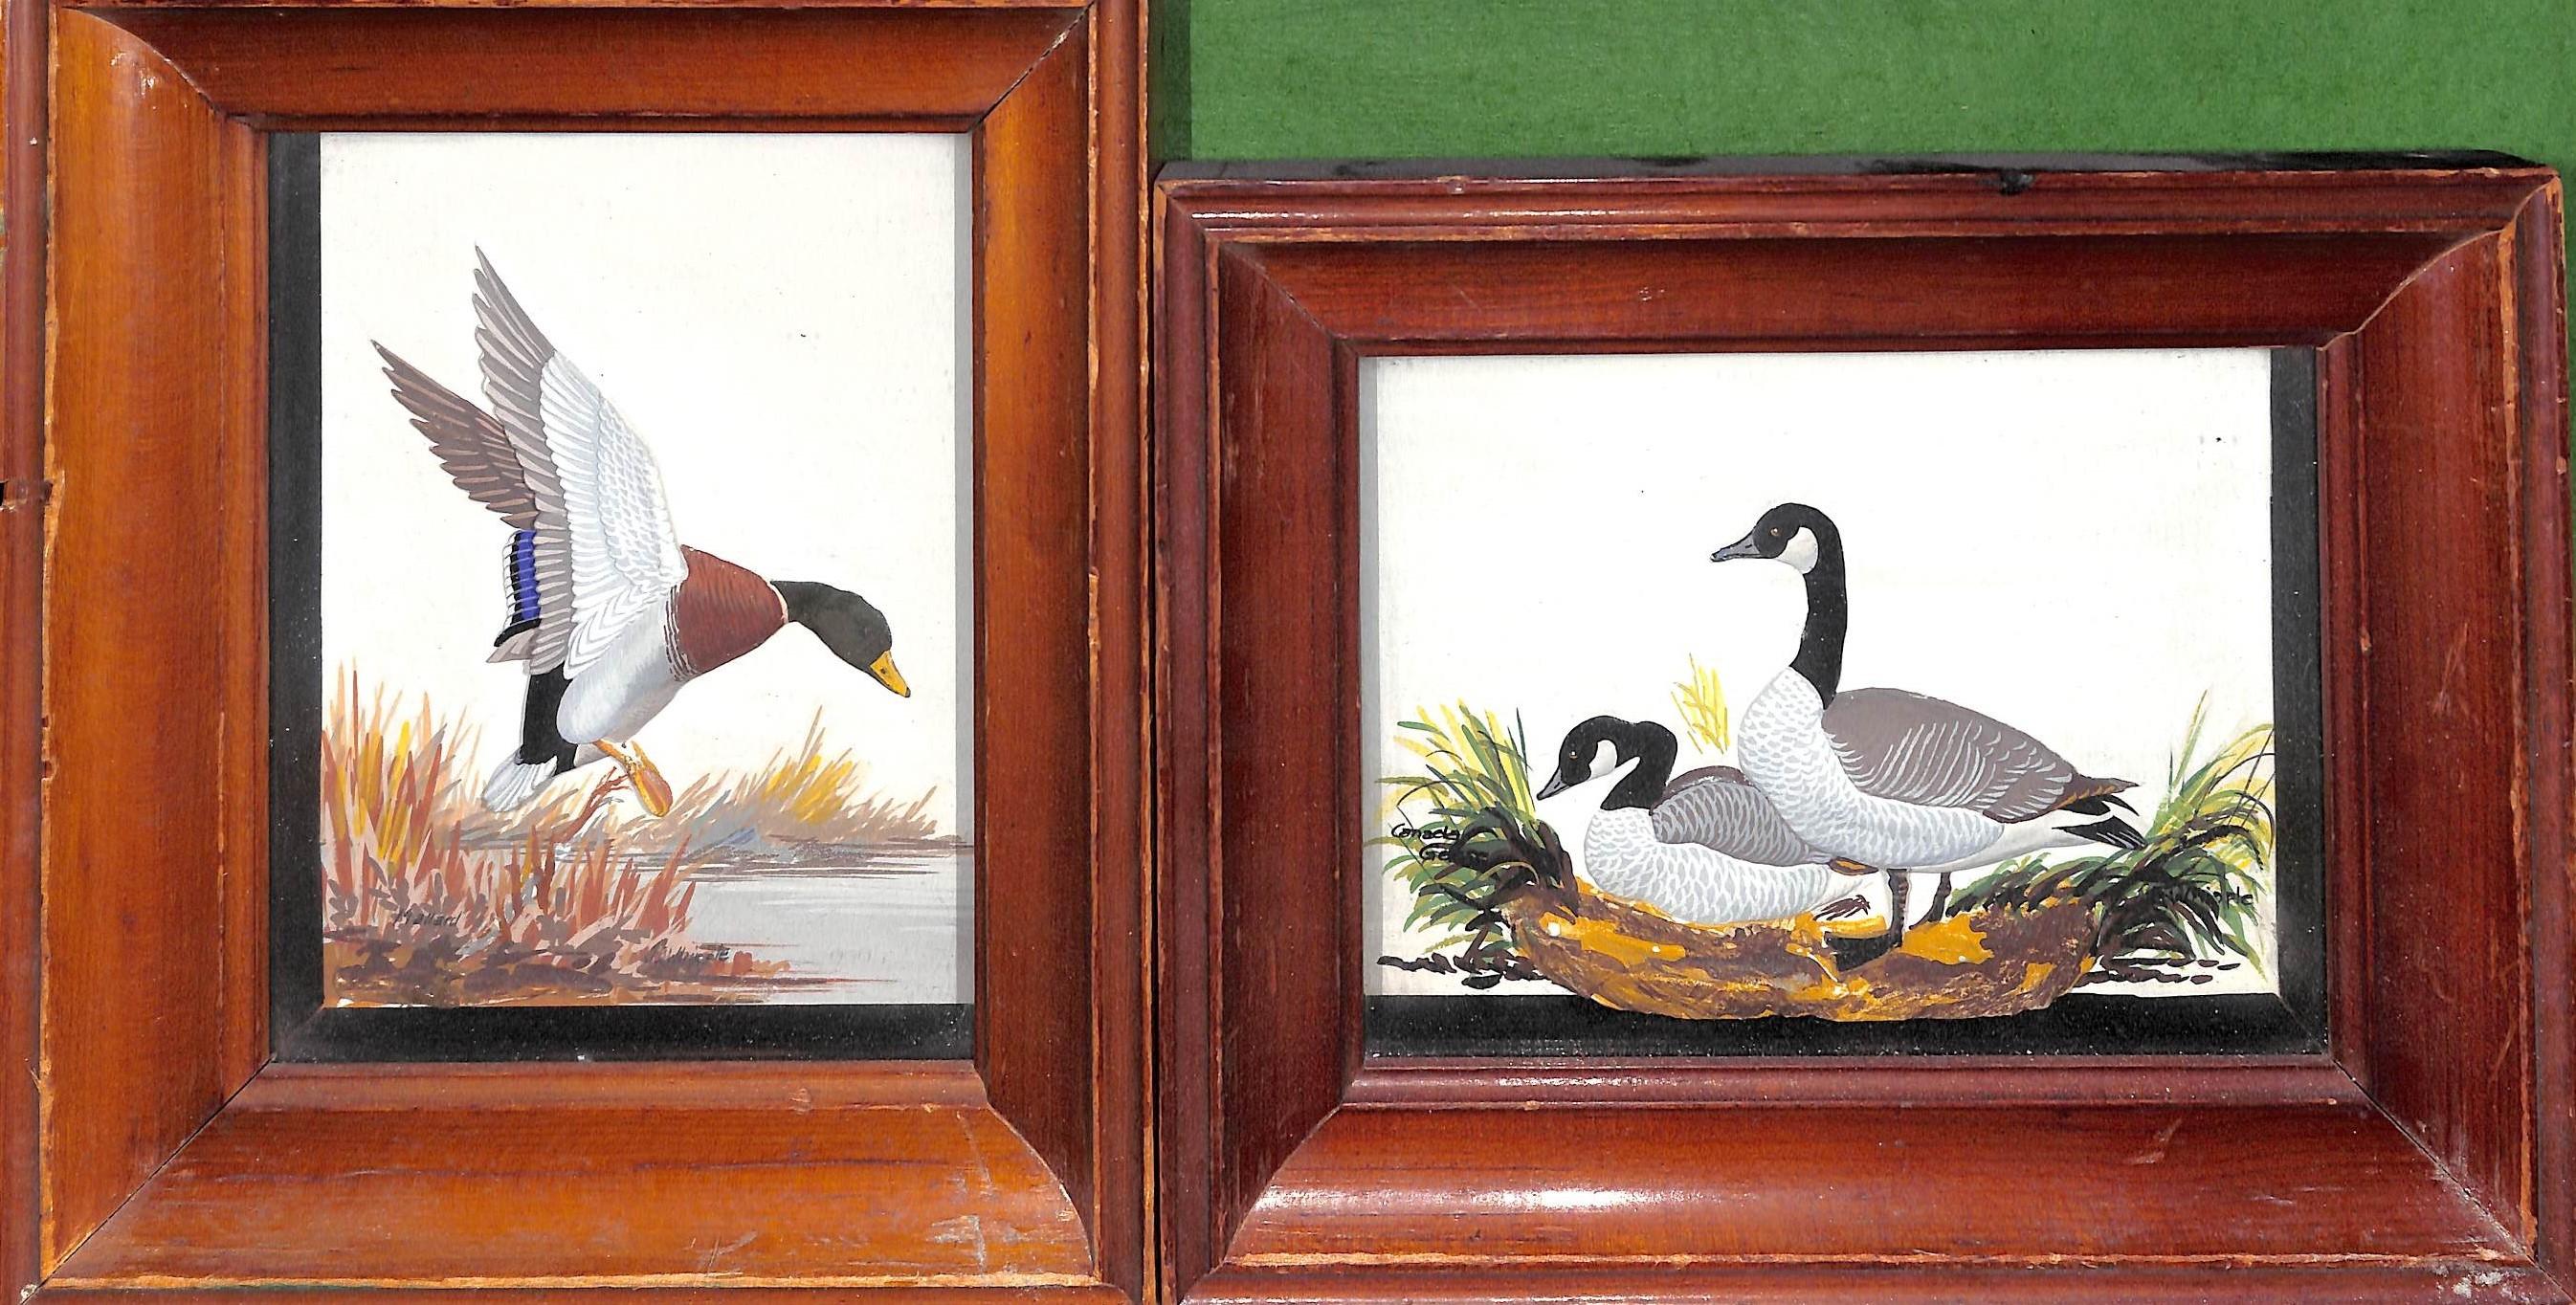 Joseph Q. Whipple, Sr. (American, Ohio; 1917 – 2008)
Mallard and Canada Geese, mid to late 20th century
Two gouache paintings over plaster bas relief ground in shadowbox frames
Each signed to the lower right
Titles inscribed to the lower